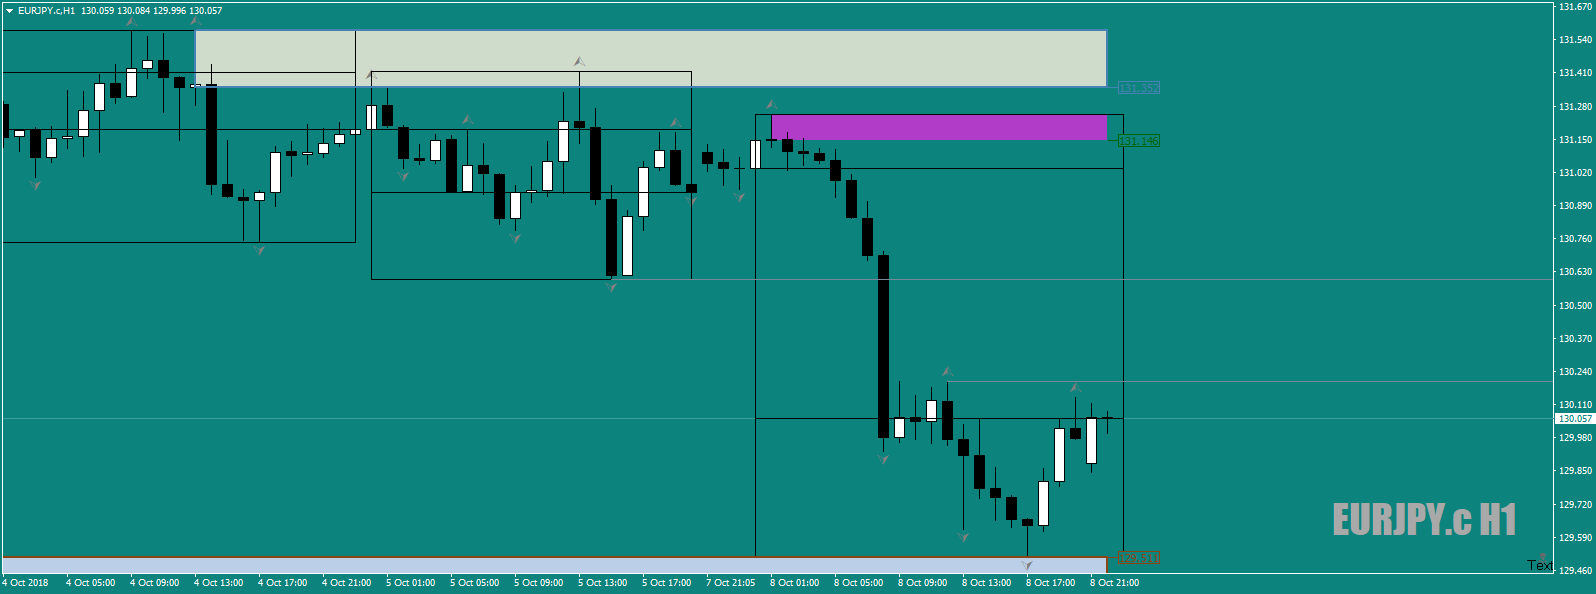 EURJPY.cH1asFractalCountBacksetUp8thOct18incZ-Line.png